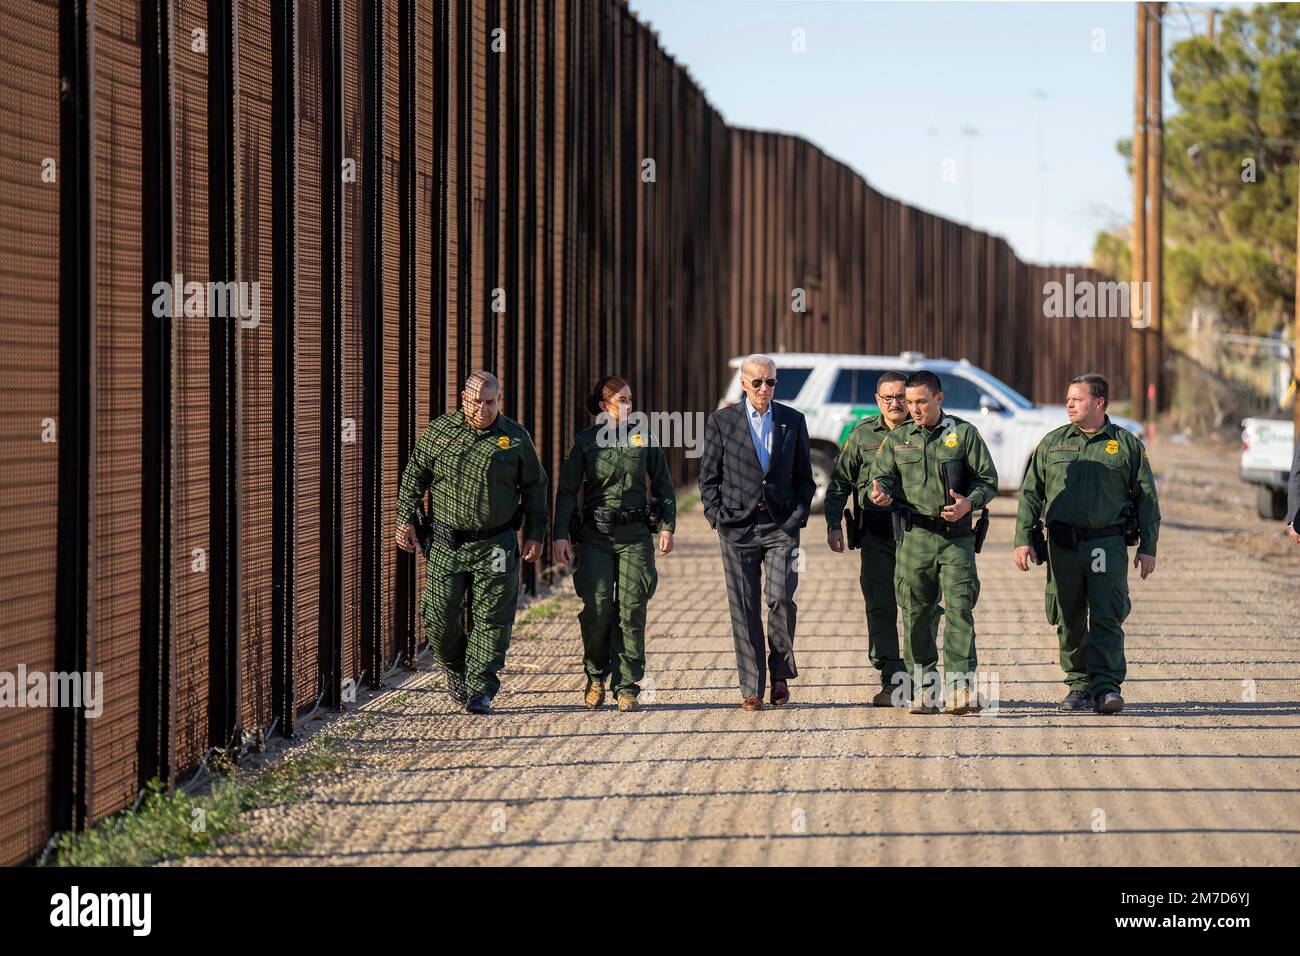 El Paso, United States of America. 08 January, 2023. U.S President Joe Biden, center, is briefed by Custom and Border Patrol officers during a visit to the border wall along the Rio Grande, January 8, 2023 in El Paso, Texas. Biden is in El Paso to view the southern border where migration is at a record high. Credit: Adam Schultz/White House Photo/Alamy Live News Stock Photo